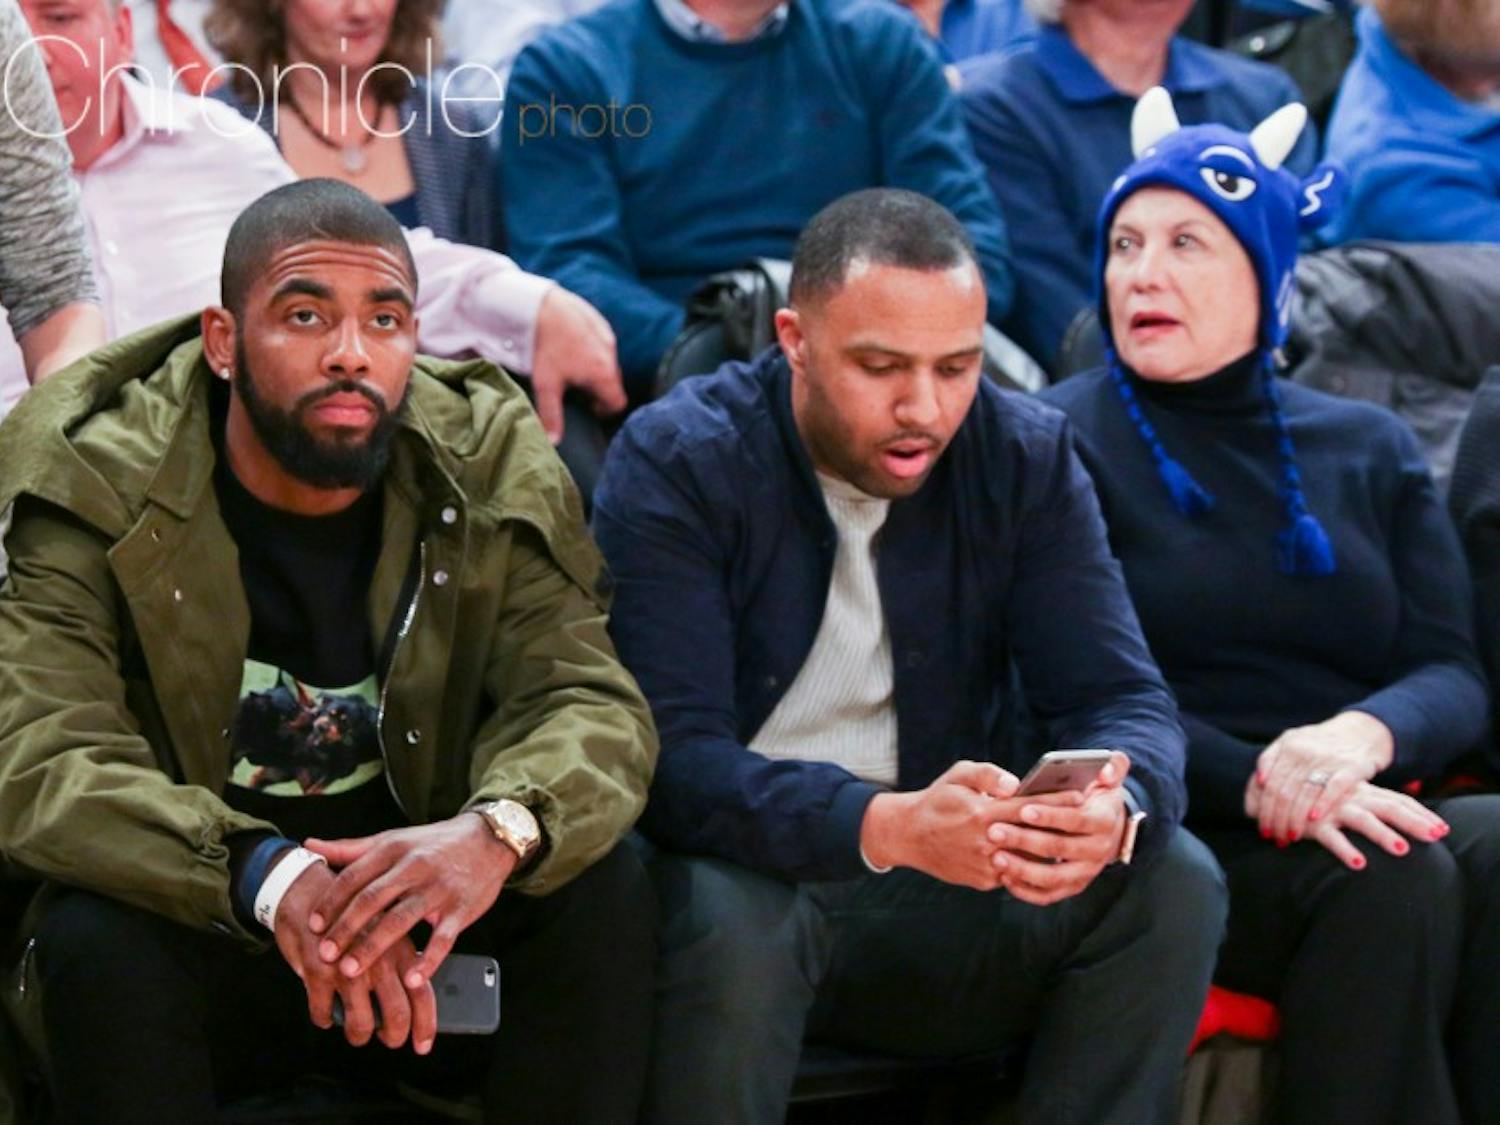 Kyrie Irving watched Duke beat Florida at Madison Square Garden a day before scoring 28 points to help the Cleveland Cavaliers beat the New York Knicks.